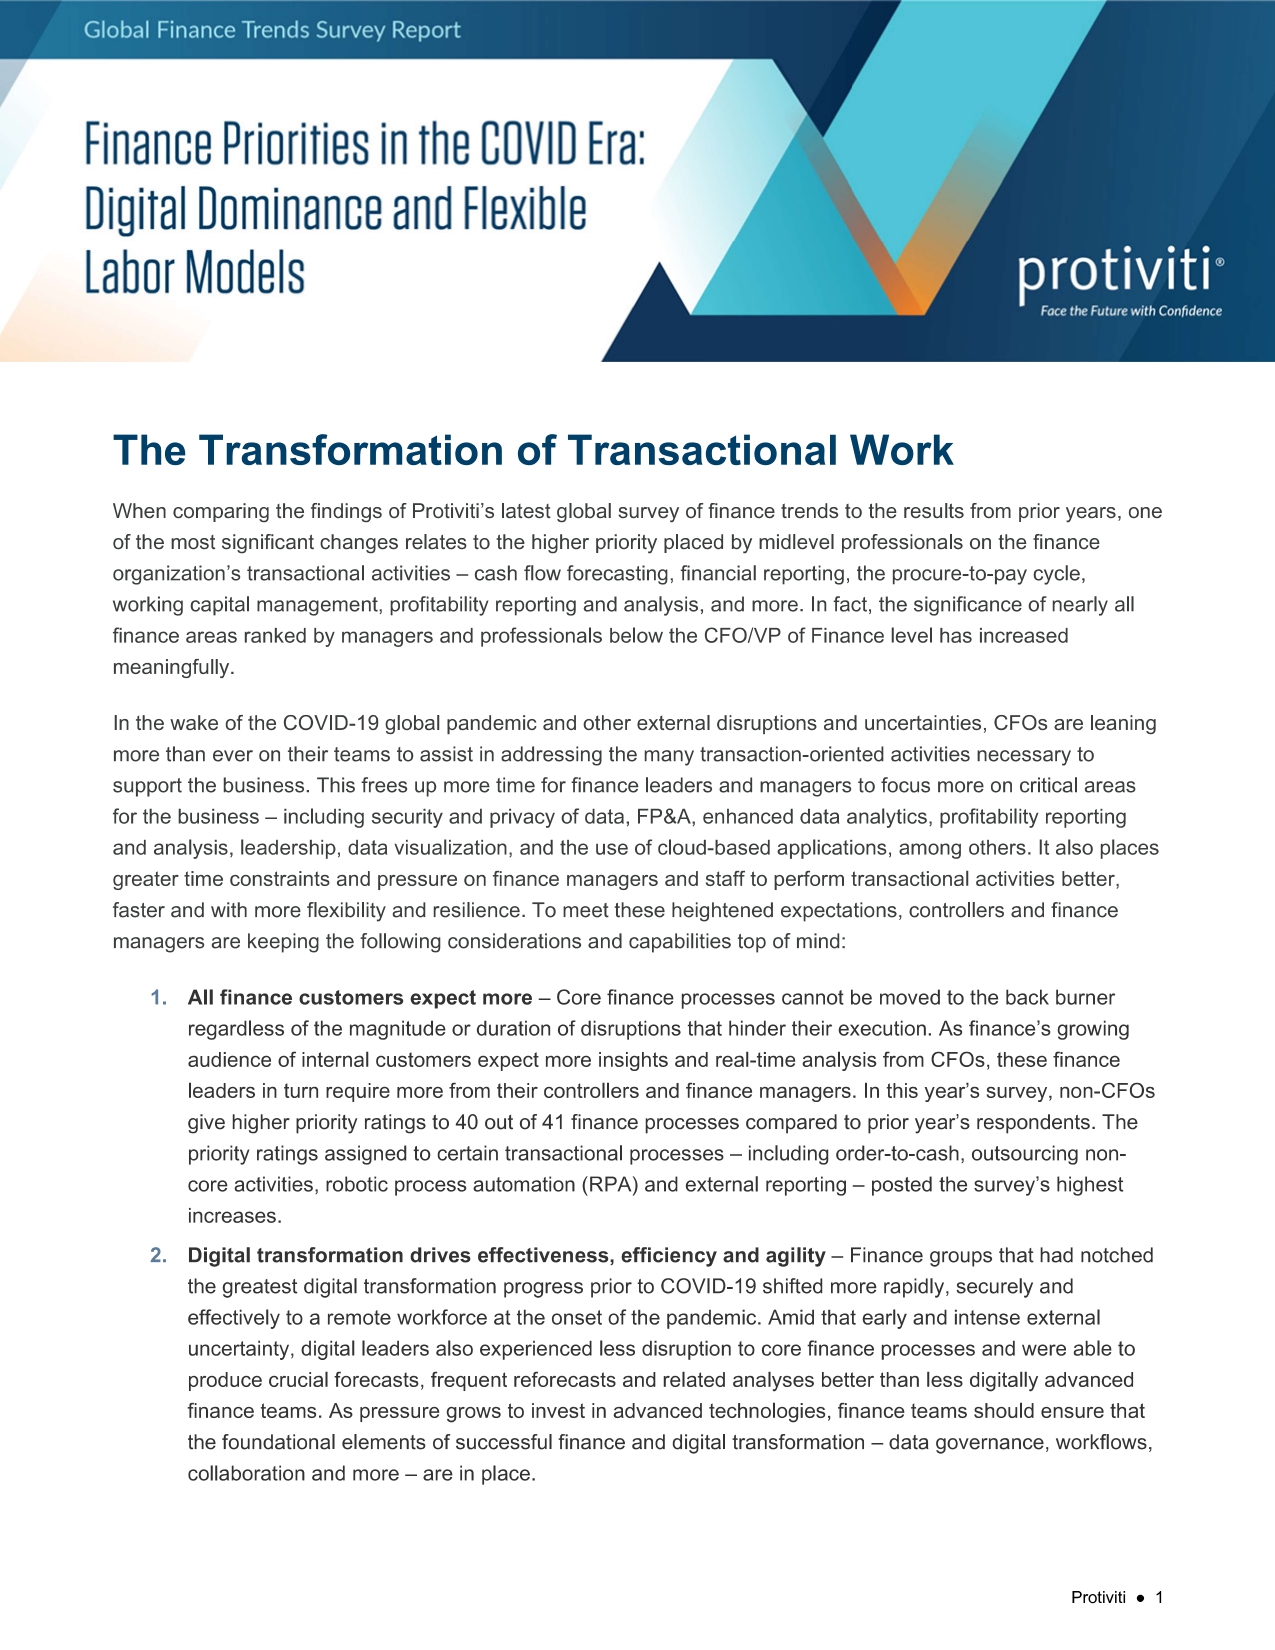 Screenshot of the first page of The Transformation of Transactional Work